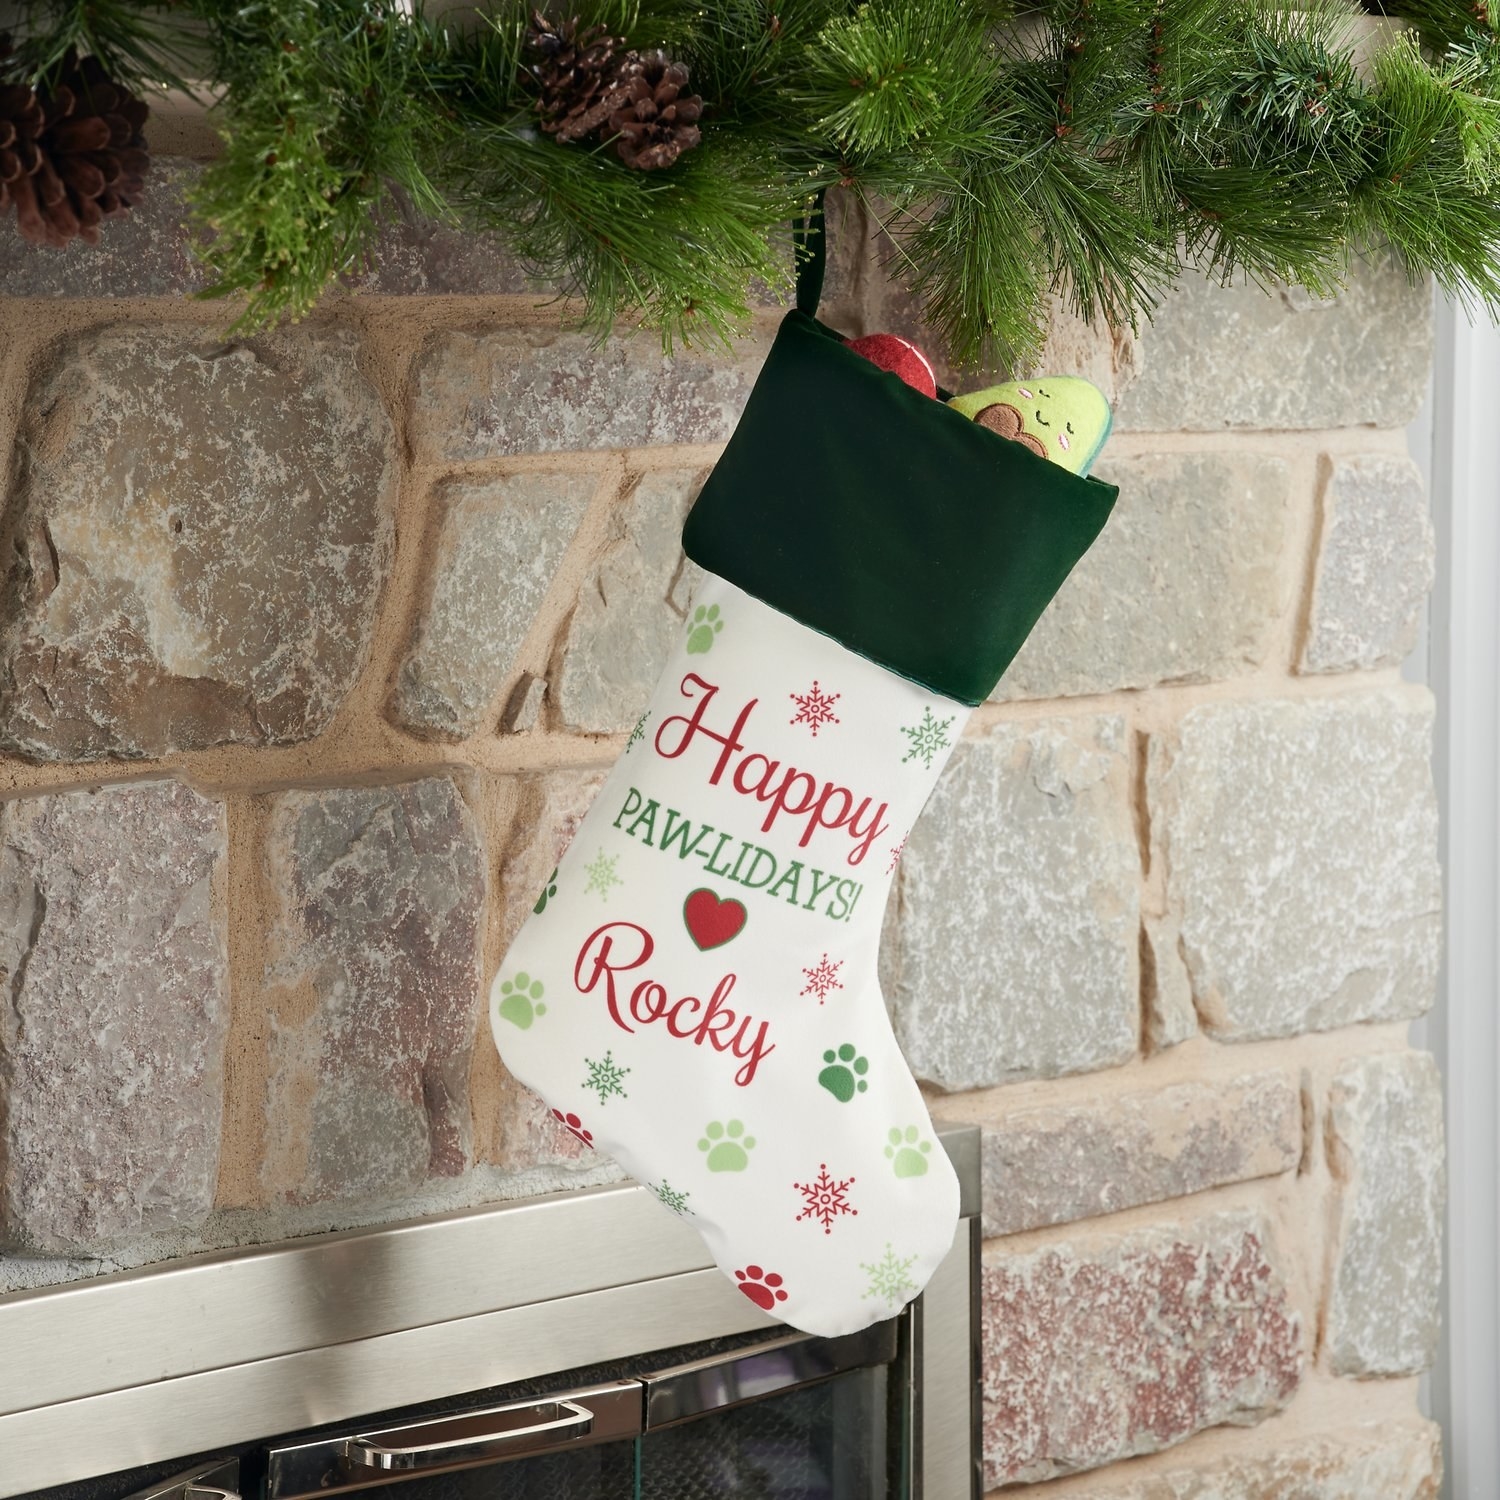 A stocking that says &quot;Happy Paw-lidays&quot;.